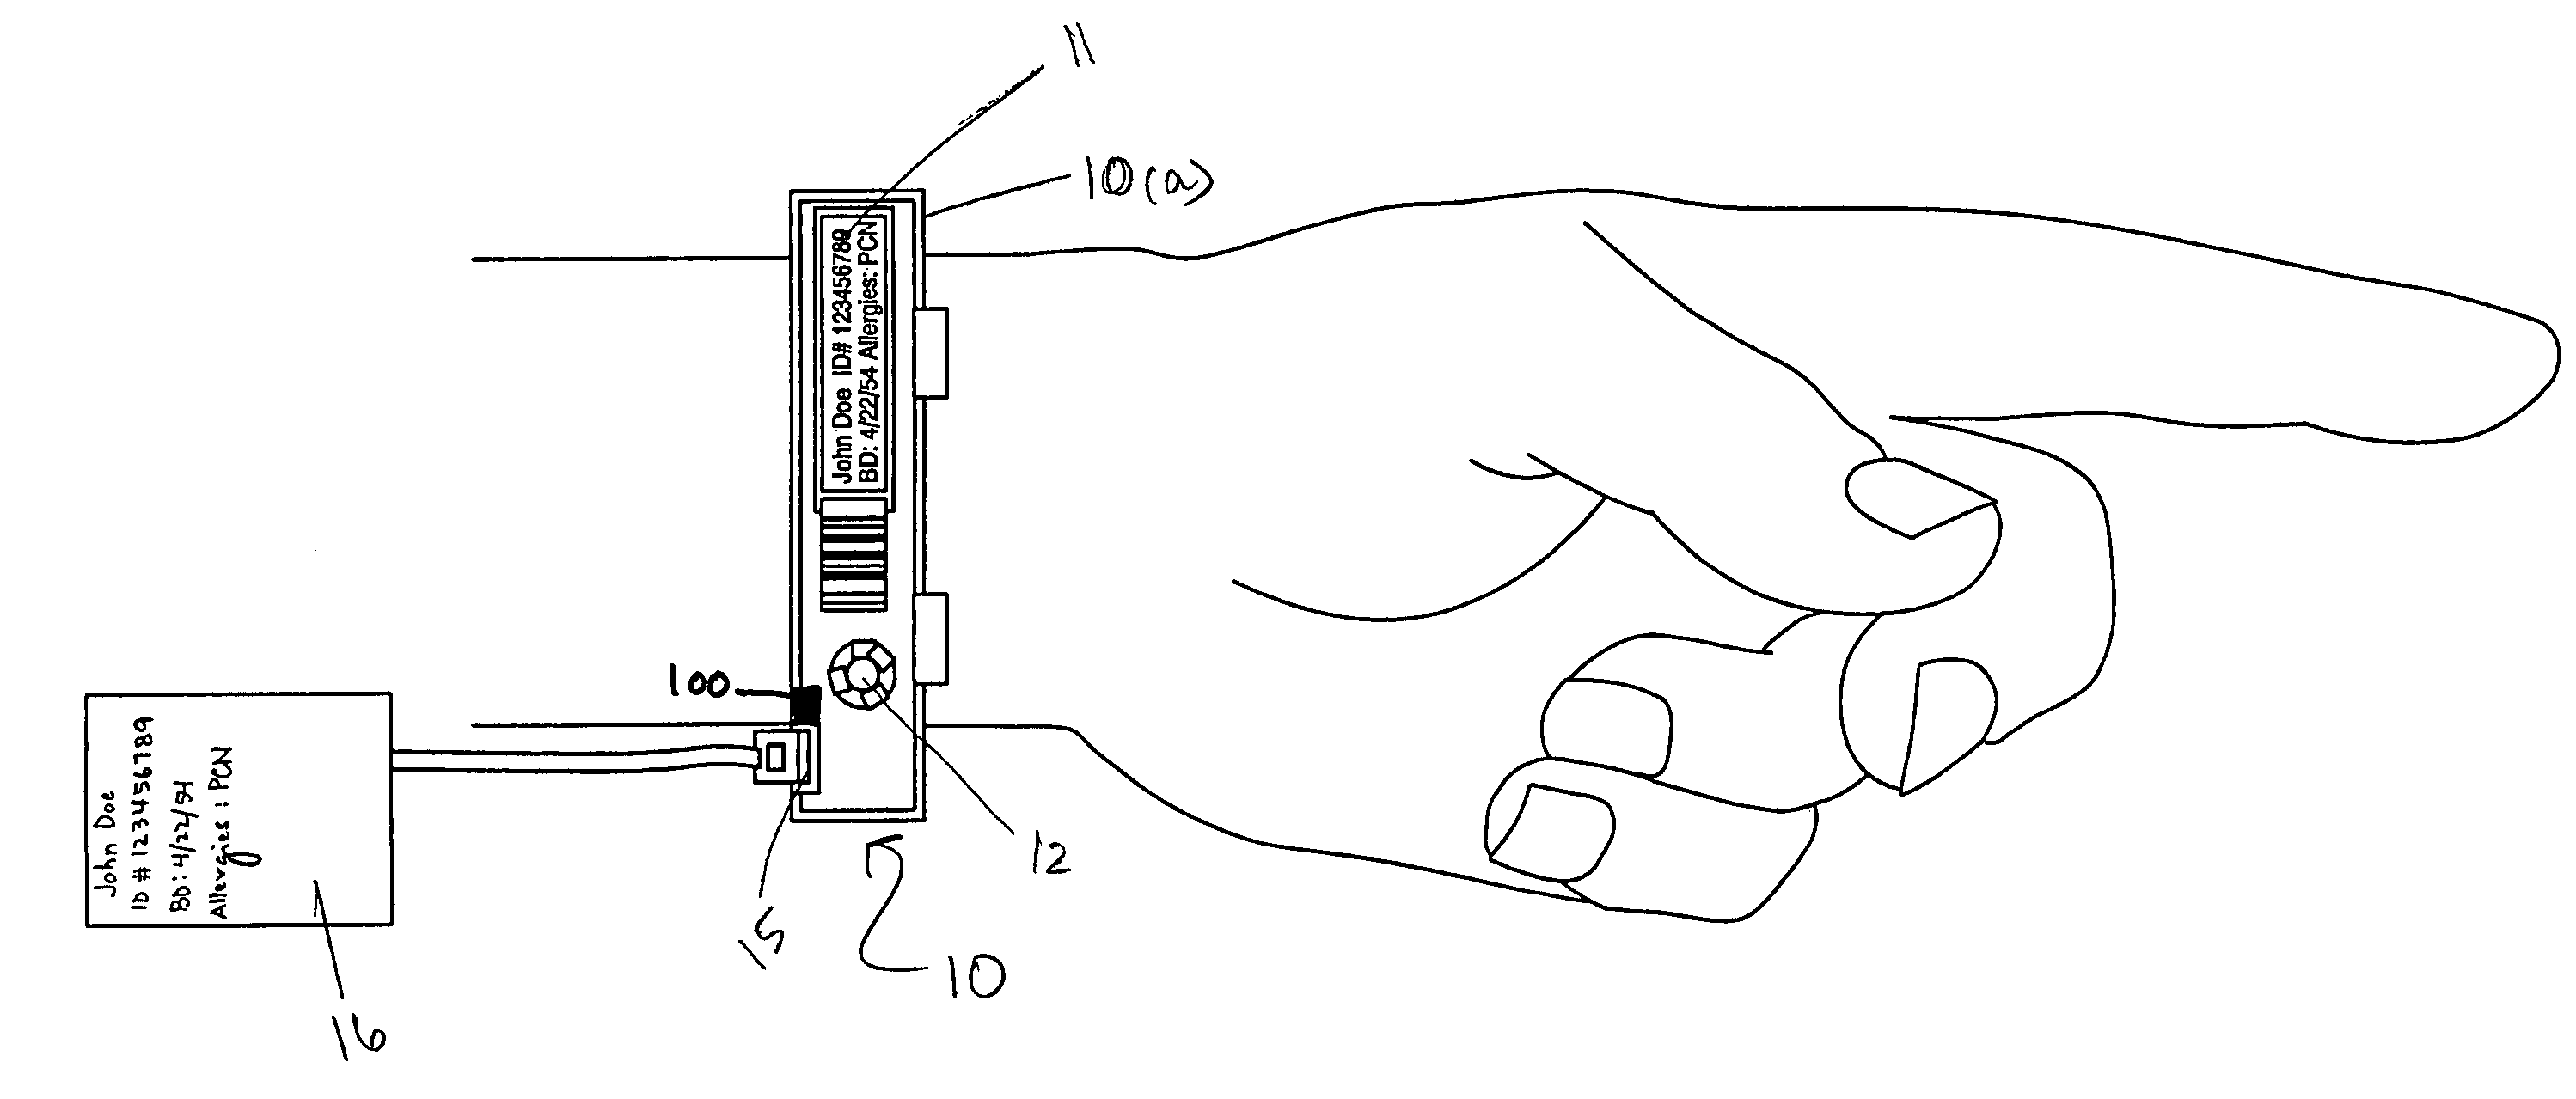 Integrated patient diagnostic and identification system